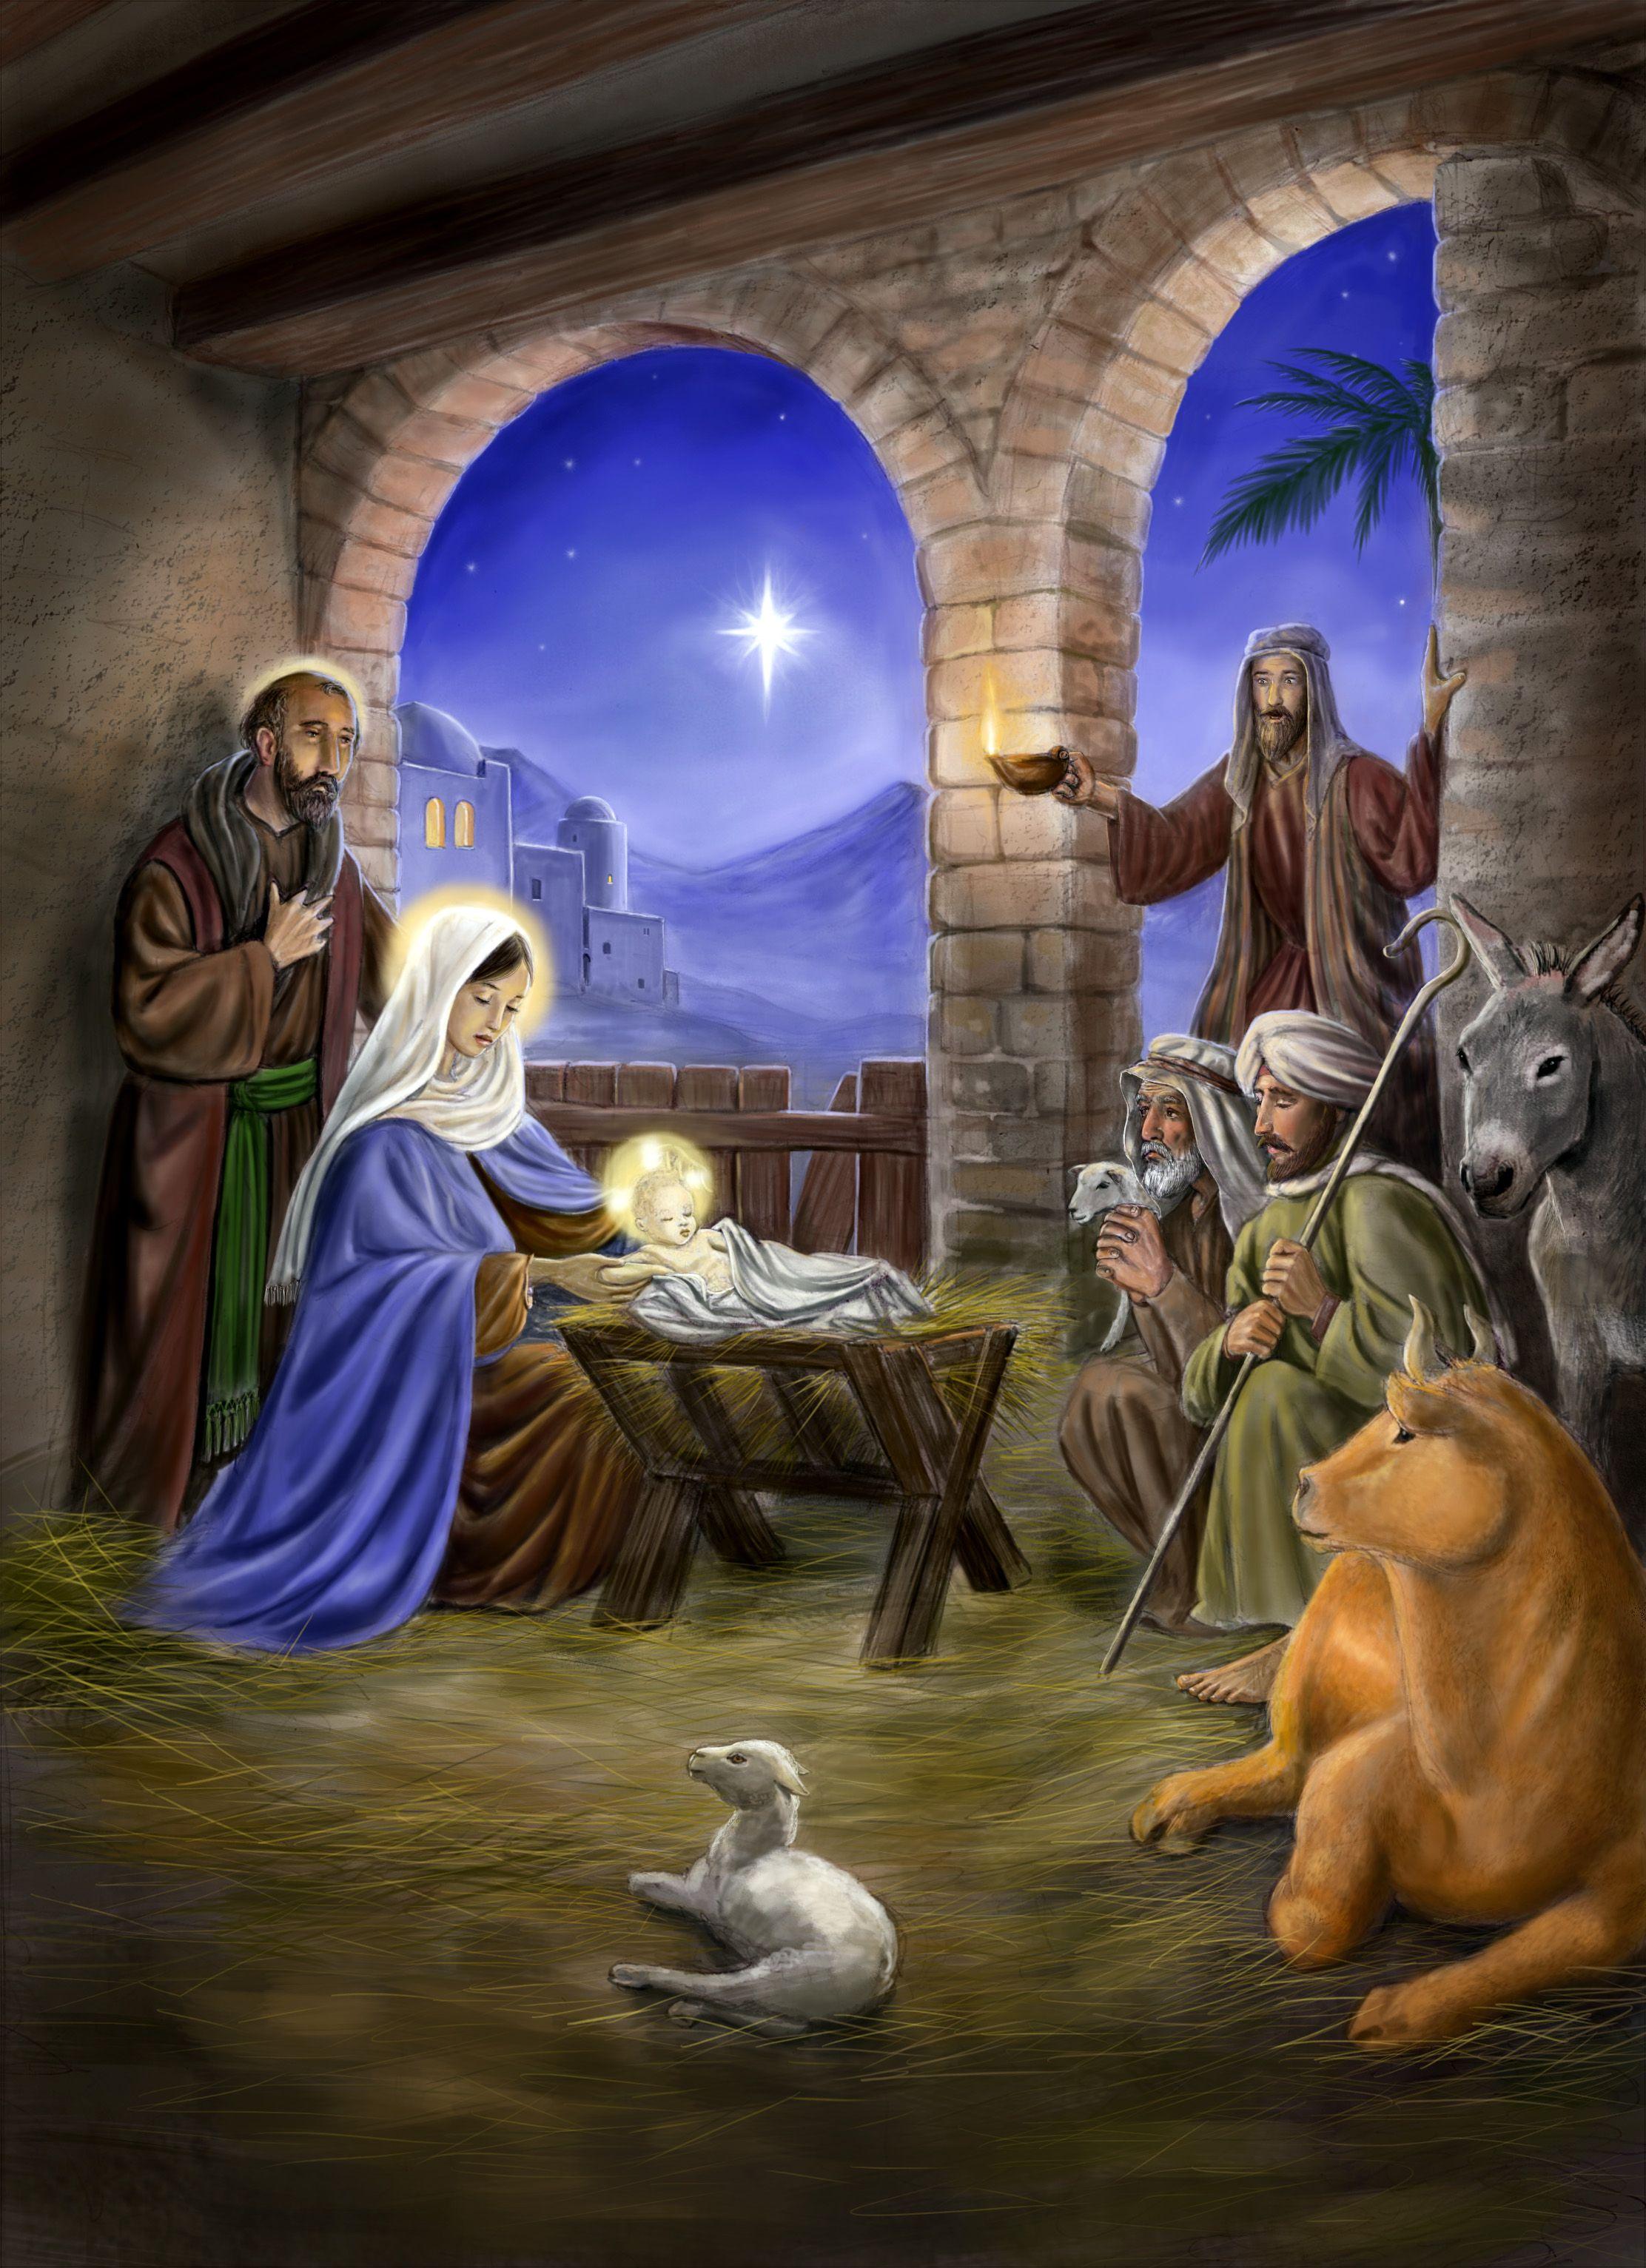 Christmas Day Wallpapers, Images And Photos. #4 Jesus-Christ Wallpaper